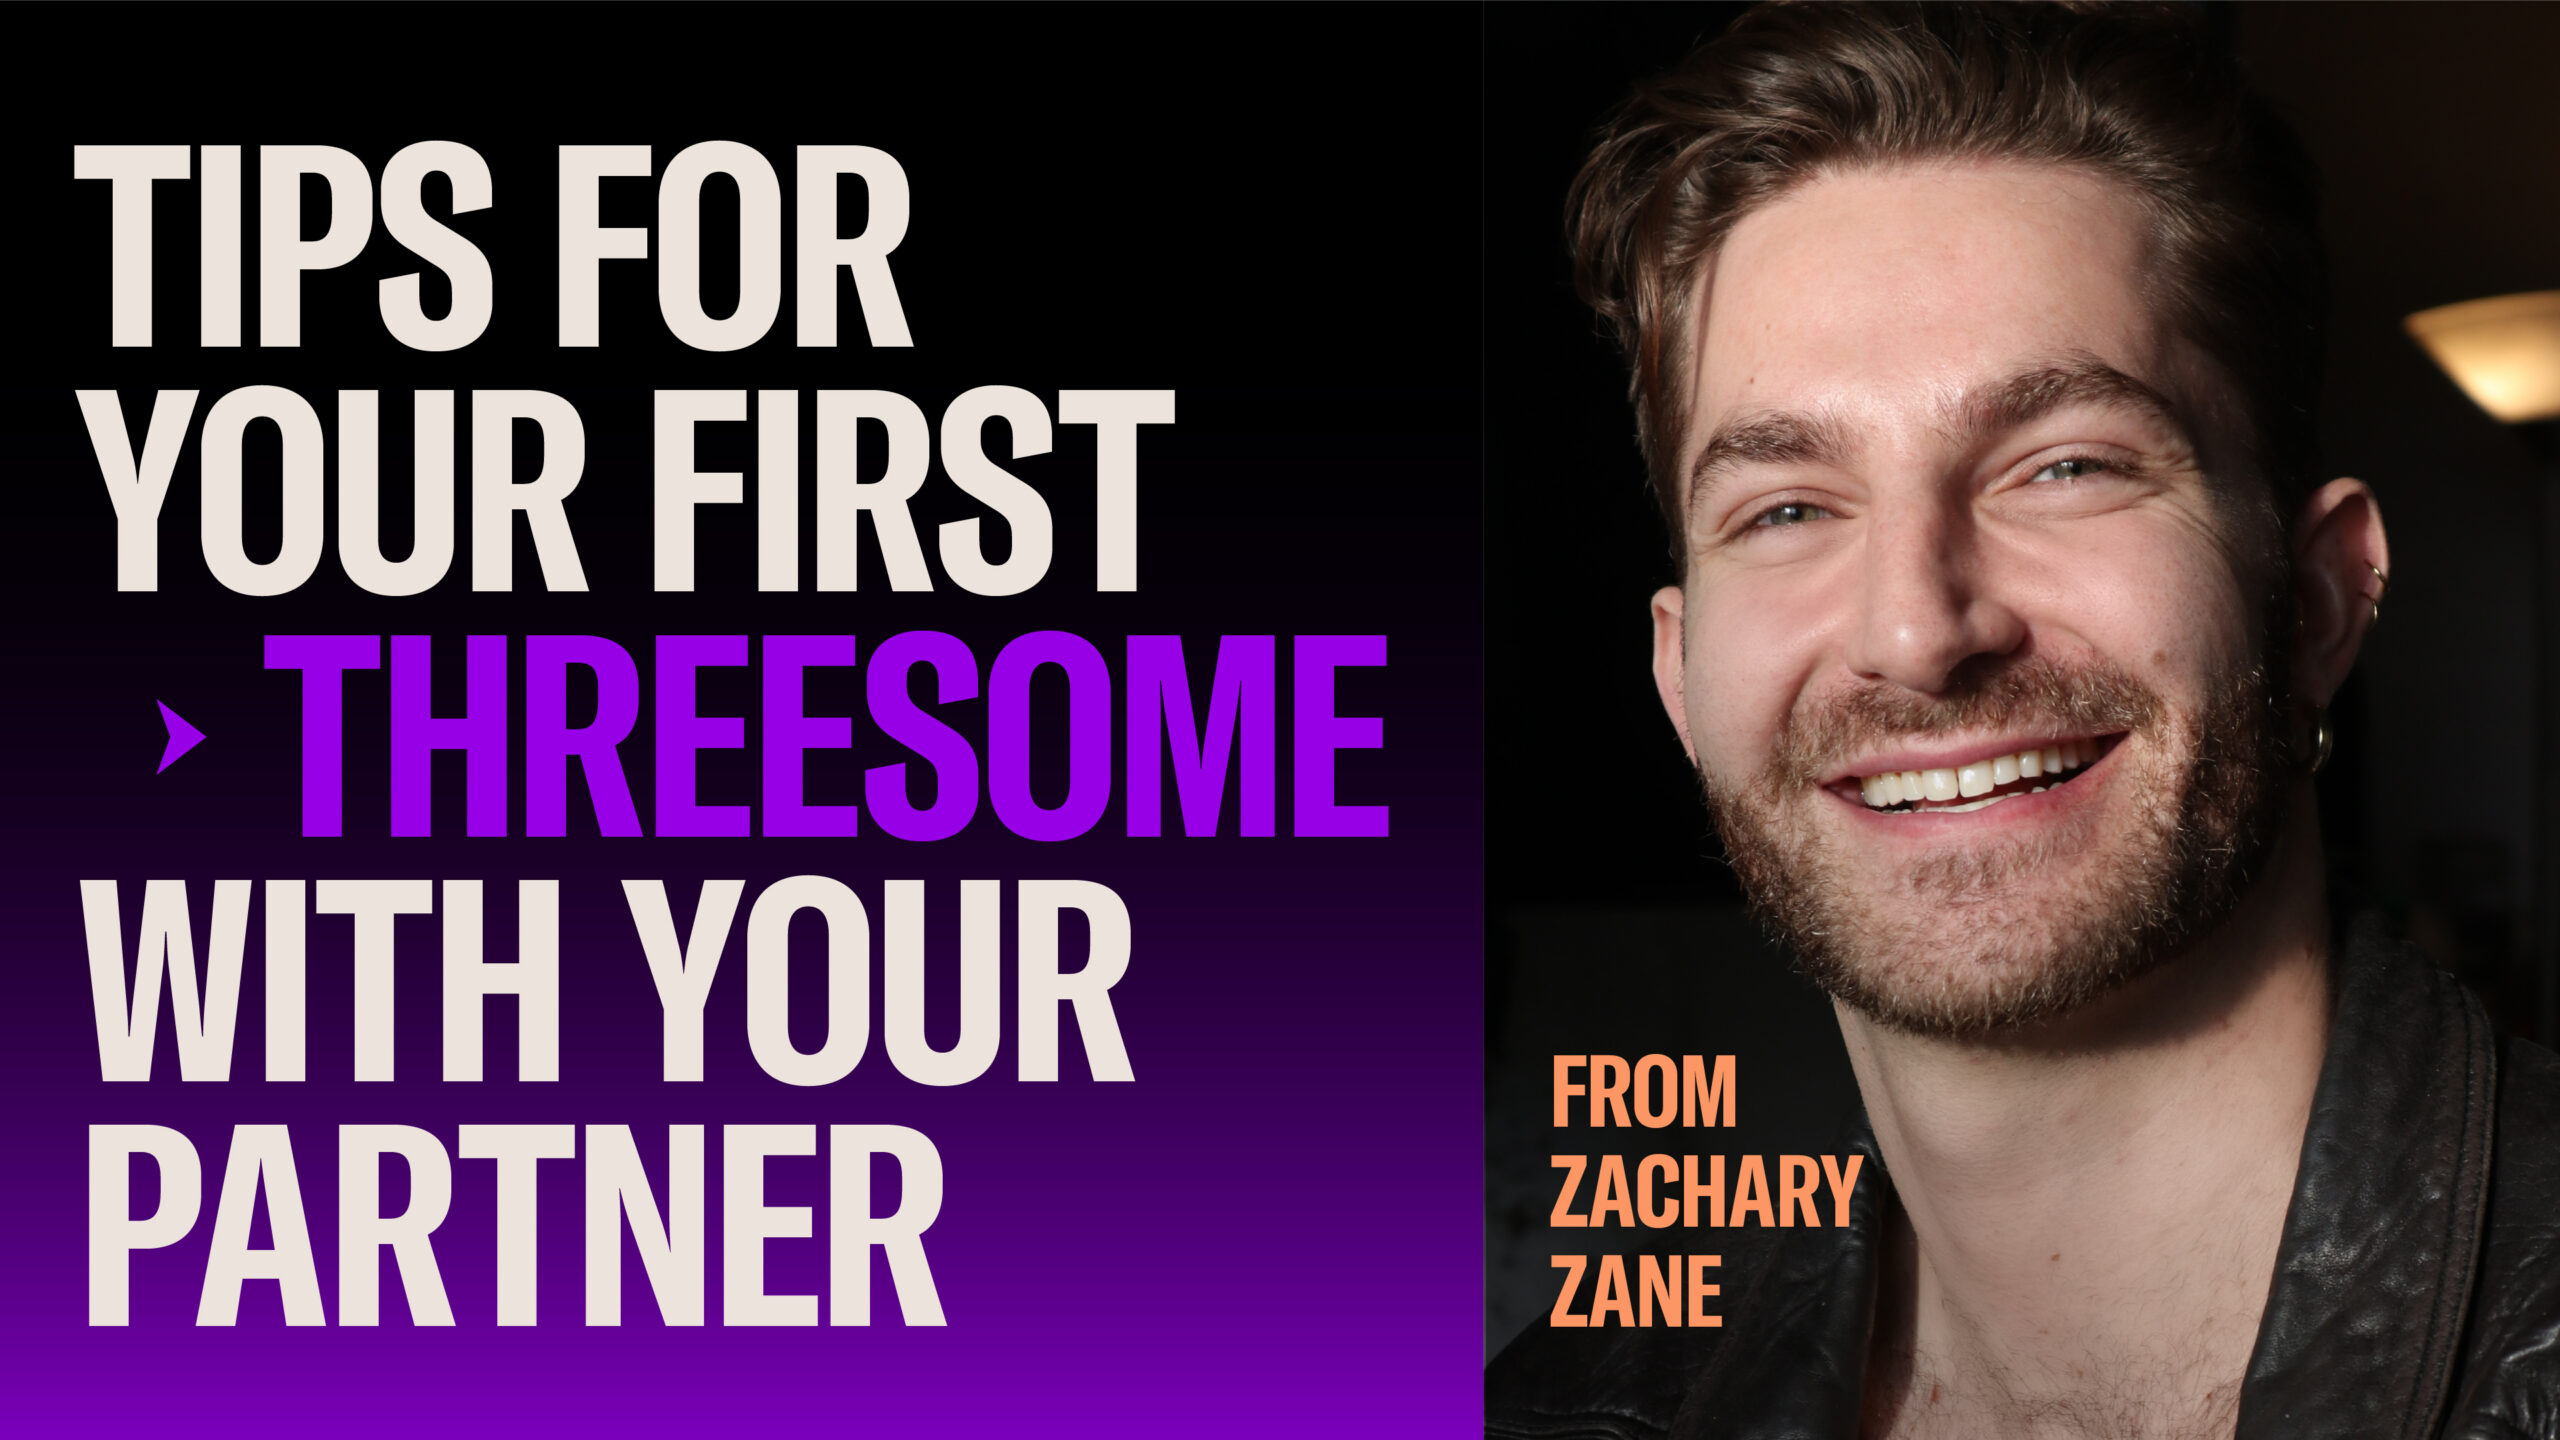 10 TIPS FOR YOUR FIRST THREESOME WITH YOUR PARTNER  Zachary Zane is a sex and relationship columnist who recently authored Boyslut: A Memoir and Manifesto.